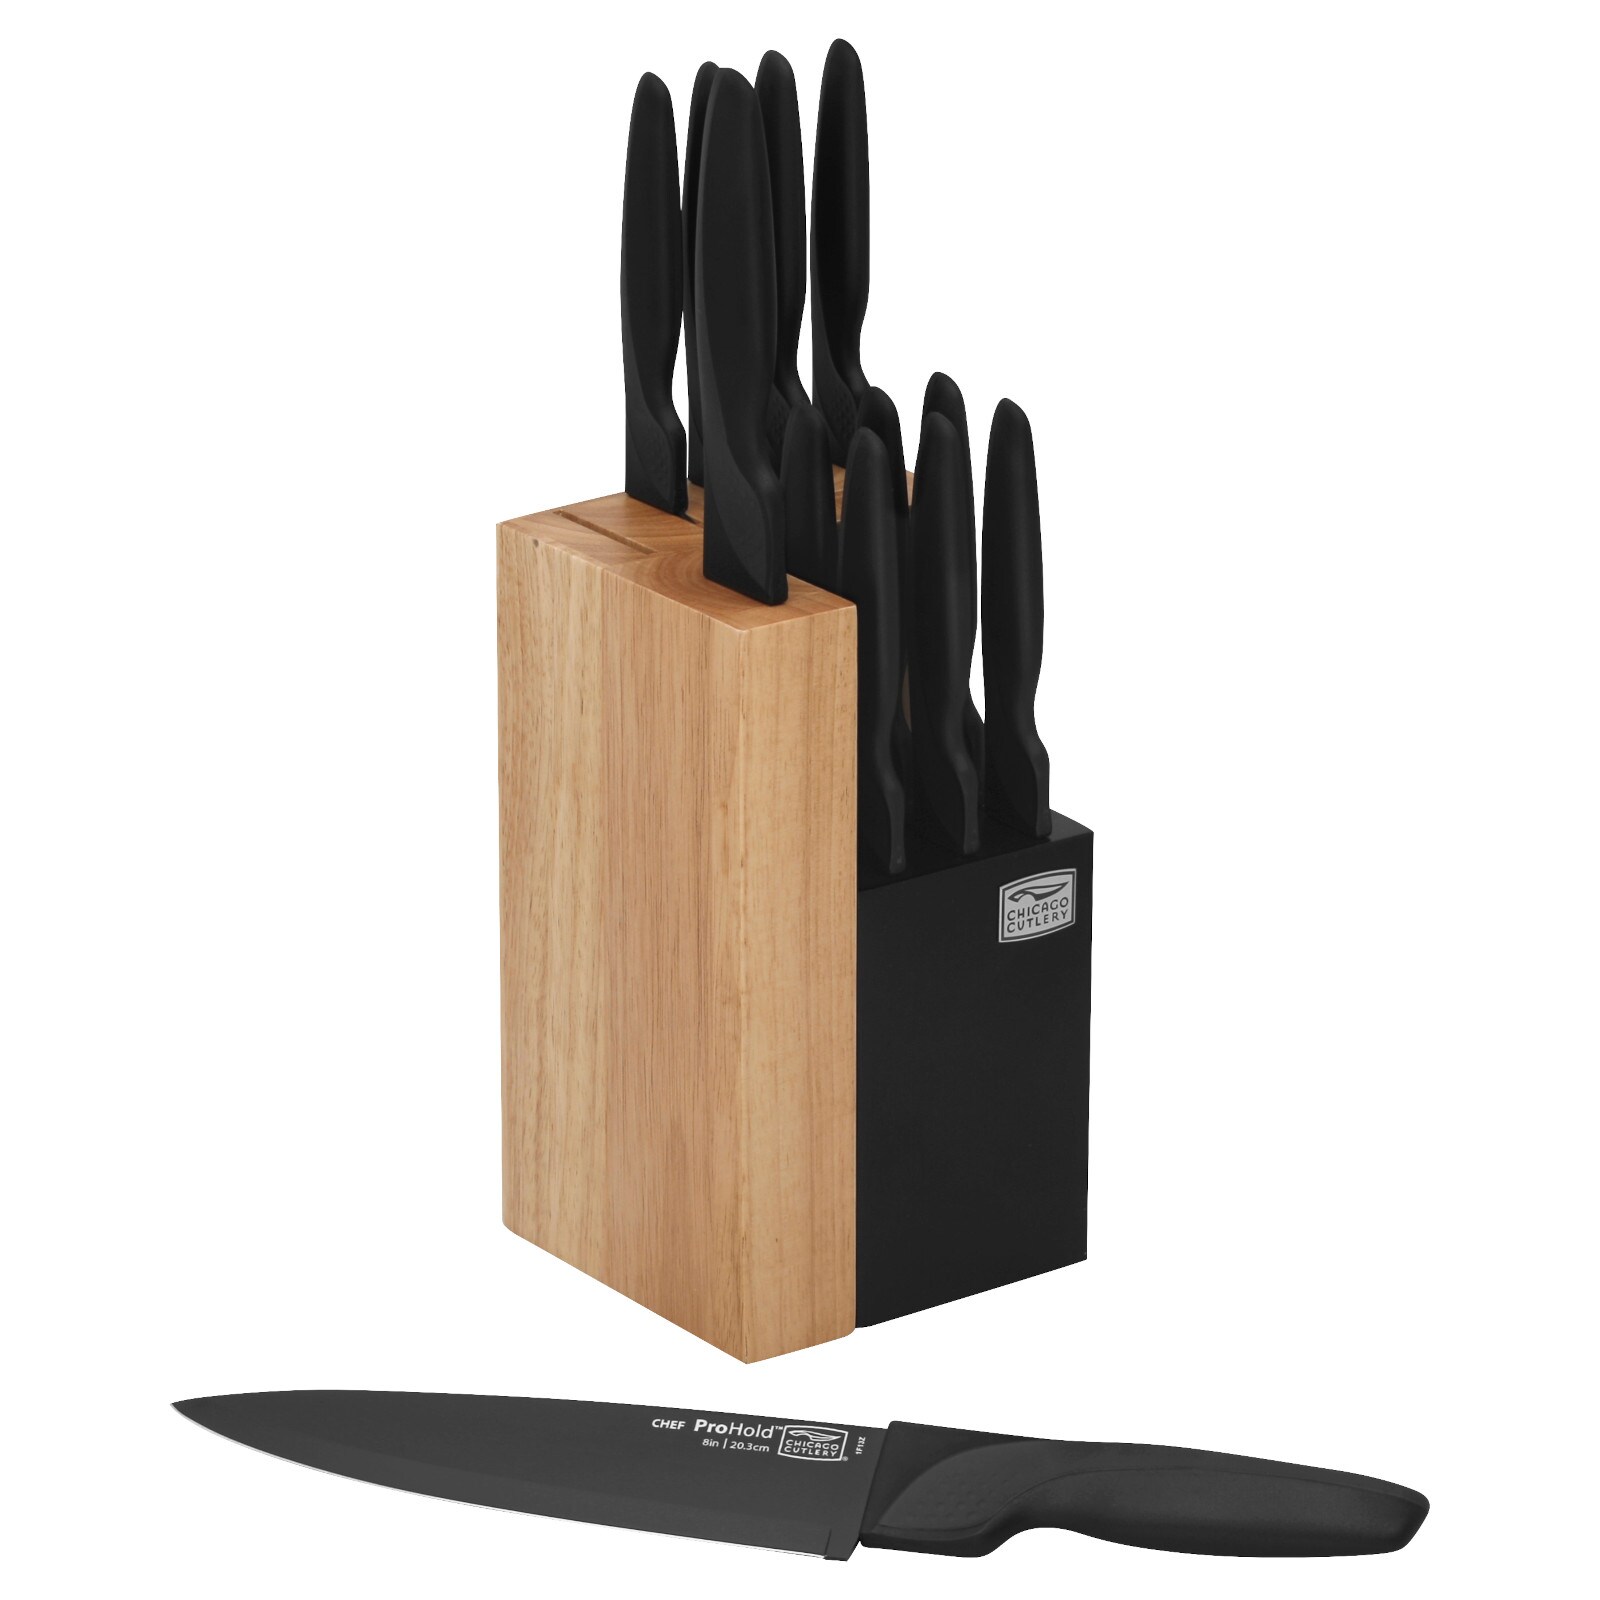 Chicago Cutlery Elston 16-Piece Kitchen Knife Set with Wood Block 